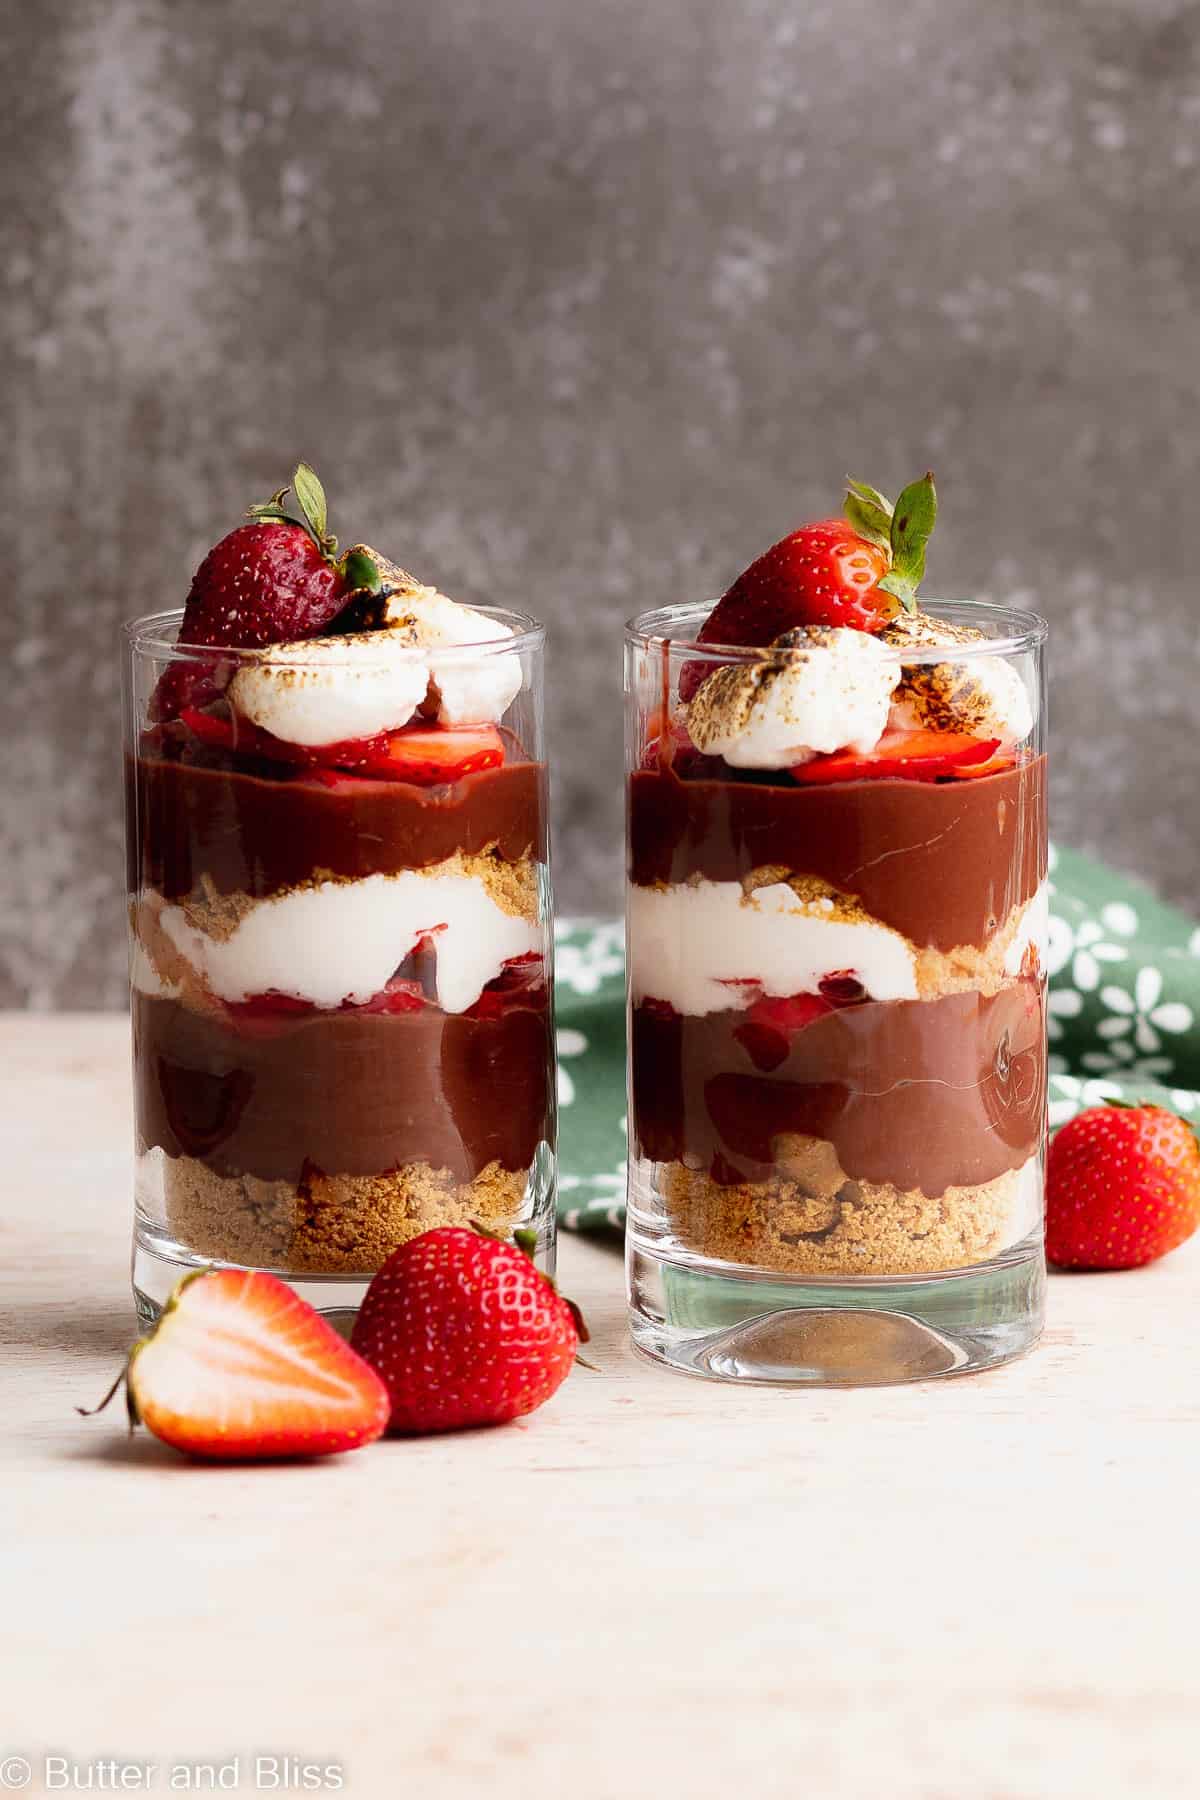 Two strawberry smores desserts in parfait glasses on a table